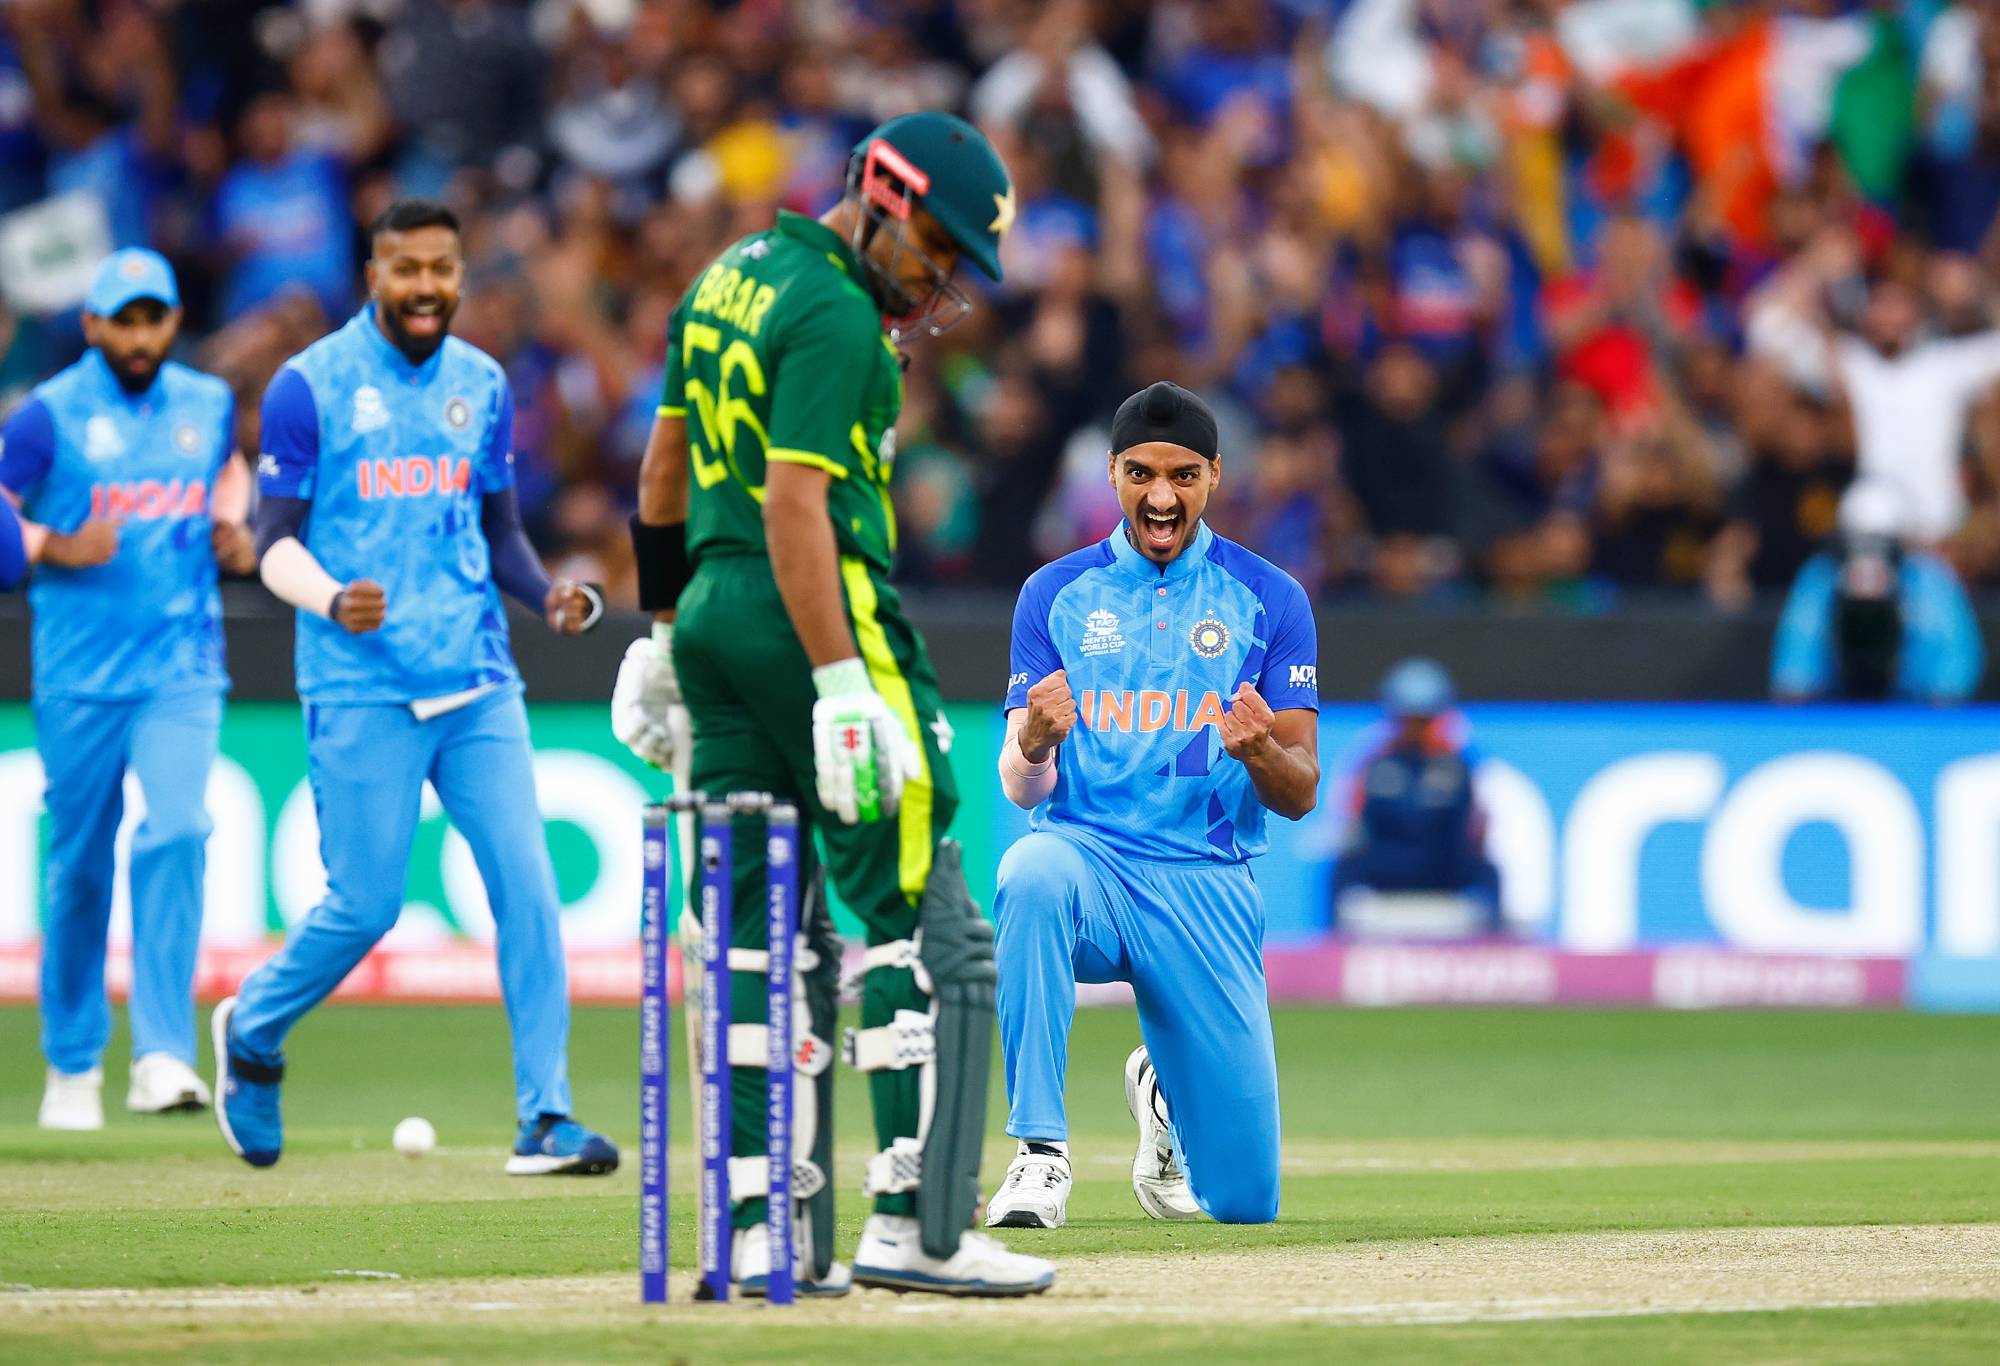 MELBOURNE, AUSTRALIA - OCTOBER 23: Arshdeep Singh of India celebrates the wicket of Babar Azam of Pakistan during the ICC Men's T20 World Cup match between India and Pakistan at Melbourne Cricket Ground on October 23, 2022 in Melbourne, Australia. (Photo by Daniel Pockett-ICC/ICC via Getty Images)